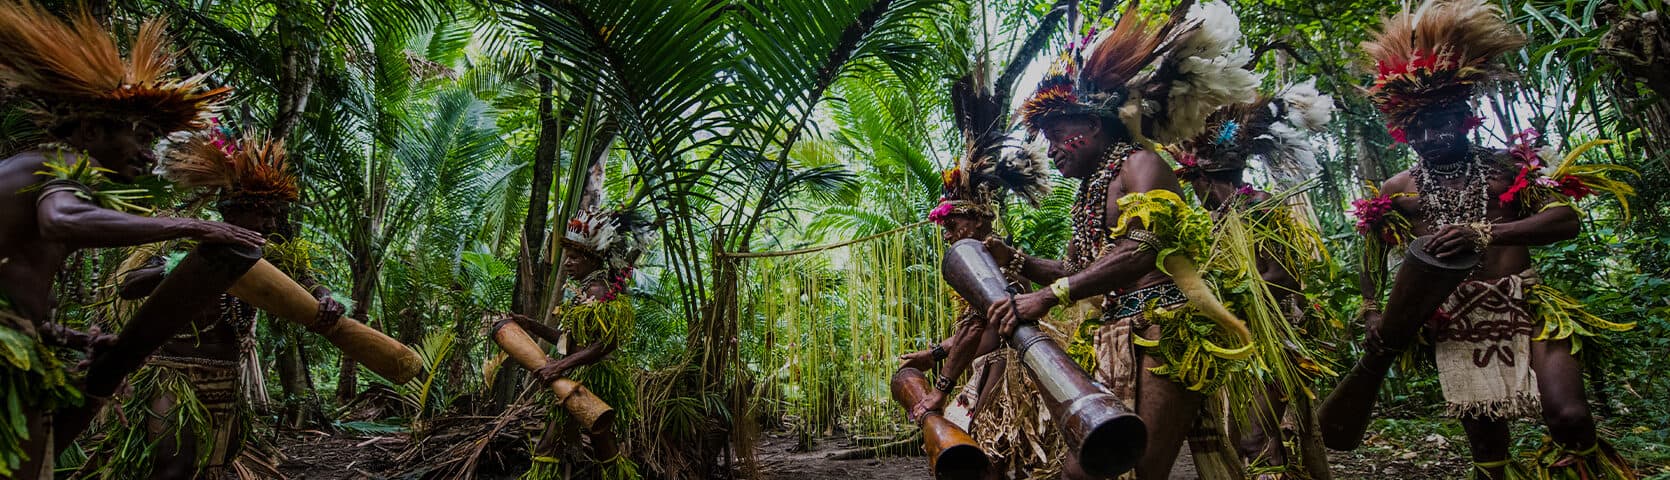 Expedition-Cruise-Papua-New-Guinea-&-Micronesia-Coral-Expeditions-PNG-Cultural-group-dance-performance